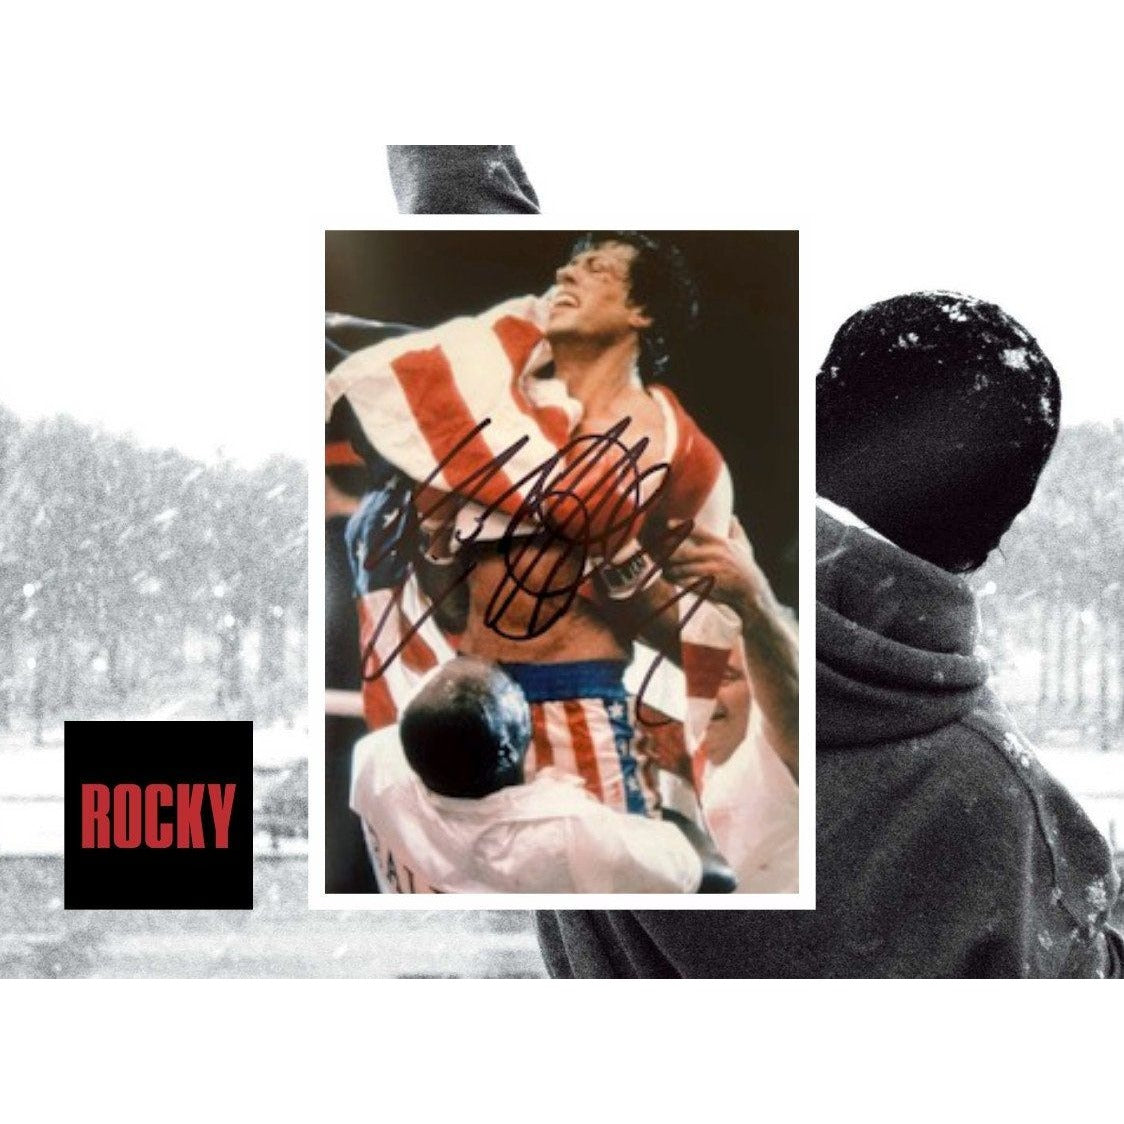 Sylvester Stallone Rocky Balboa 5 by 7 photo signed